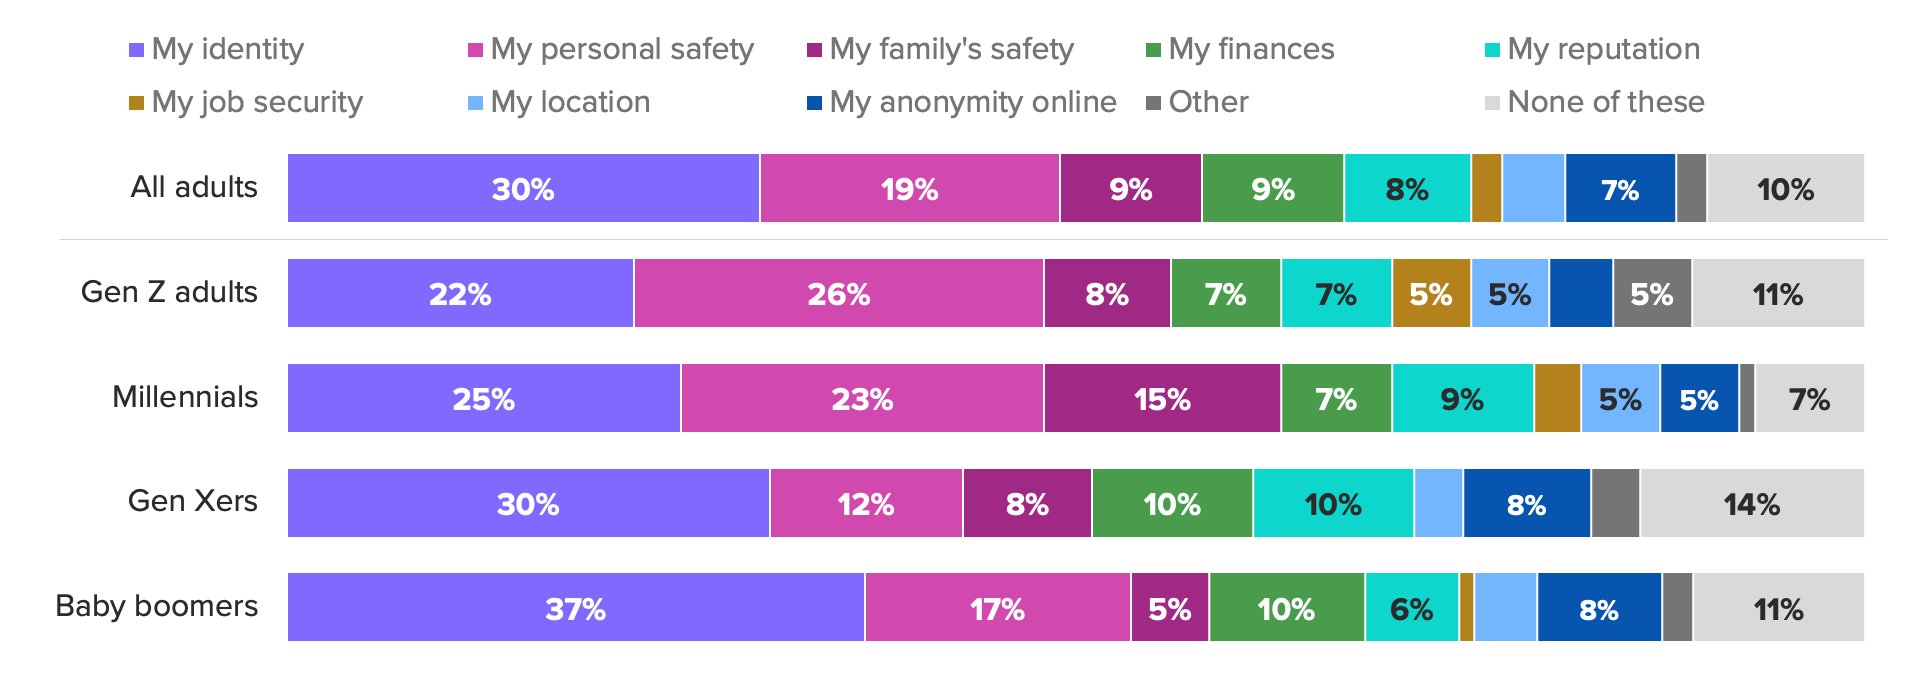 Bar chart of respondents' concerns about data privacy breaches in social media companies, showing Gen Z adults are more likely to be concerned about their personal safety being compromised, while Gen Xers are more worried about their identity.